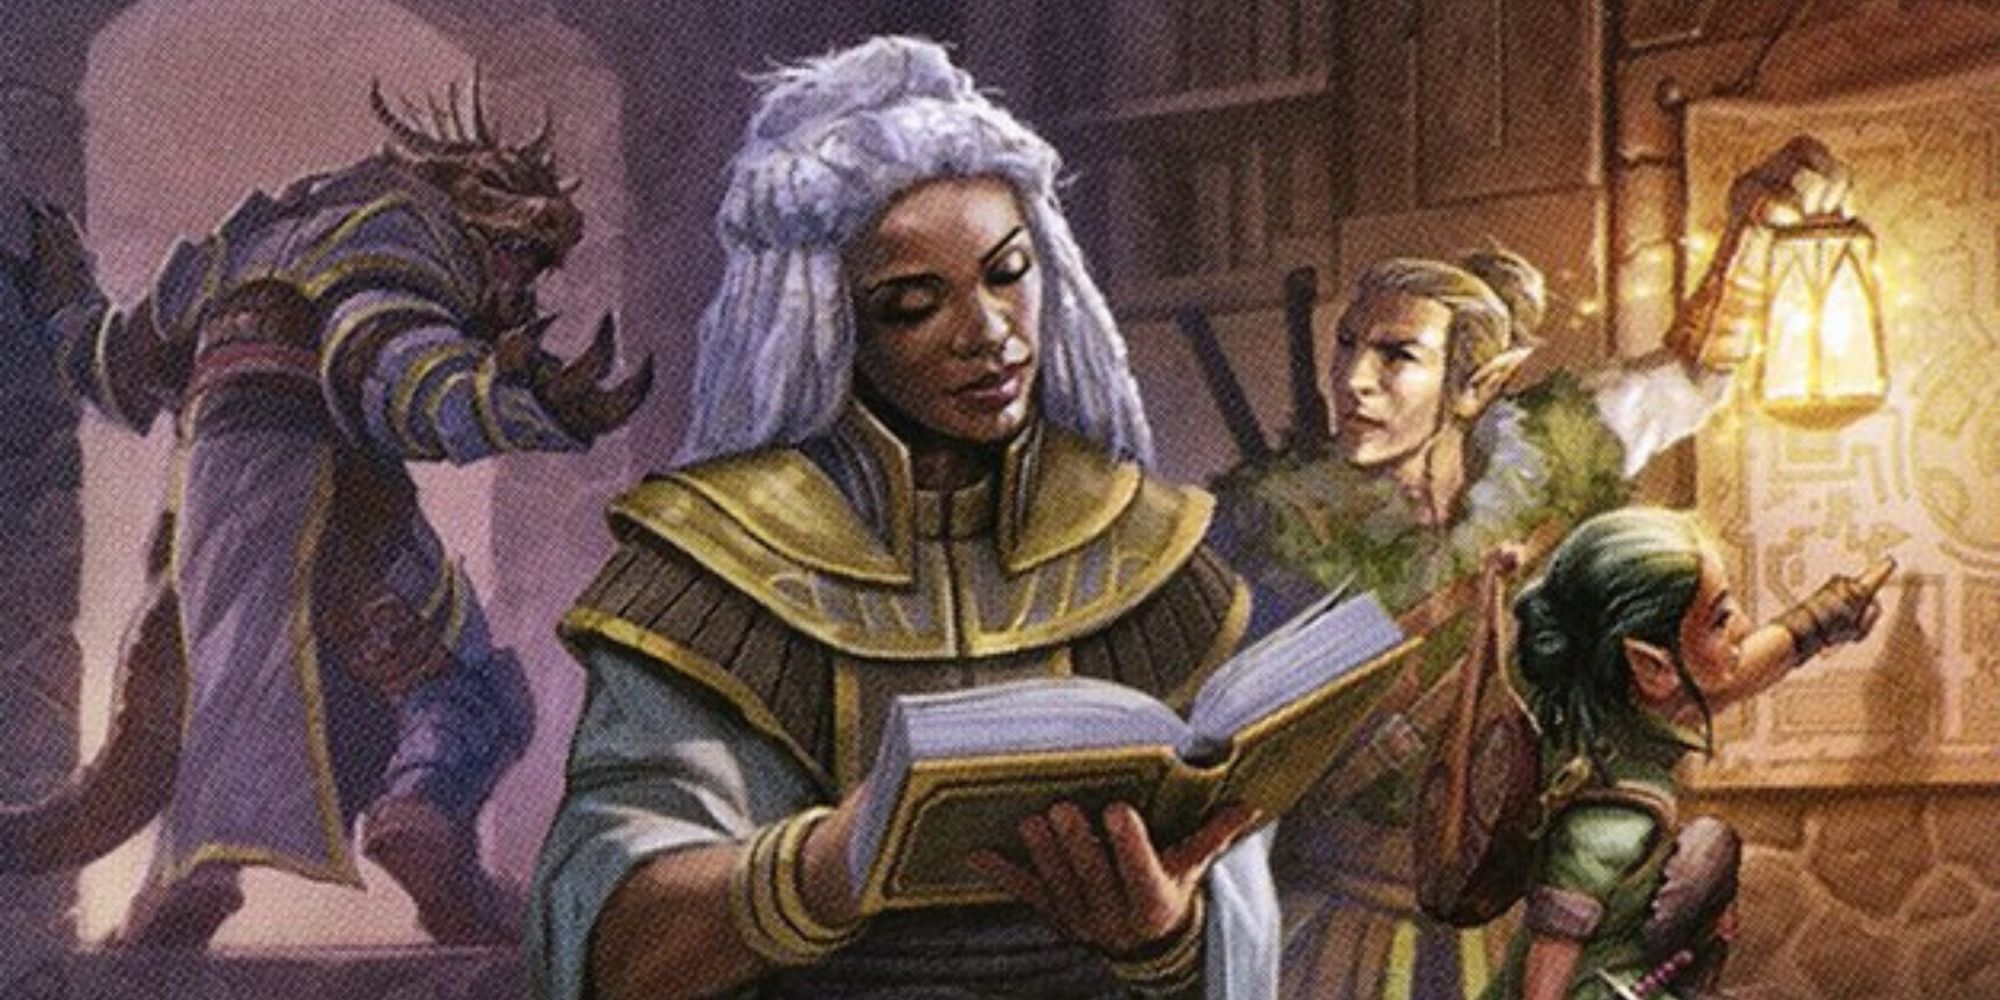 Artwork of a party of adventurers investigating a room, with the focus being on a human wizard holding a large tome